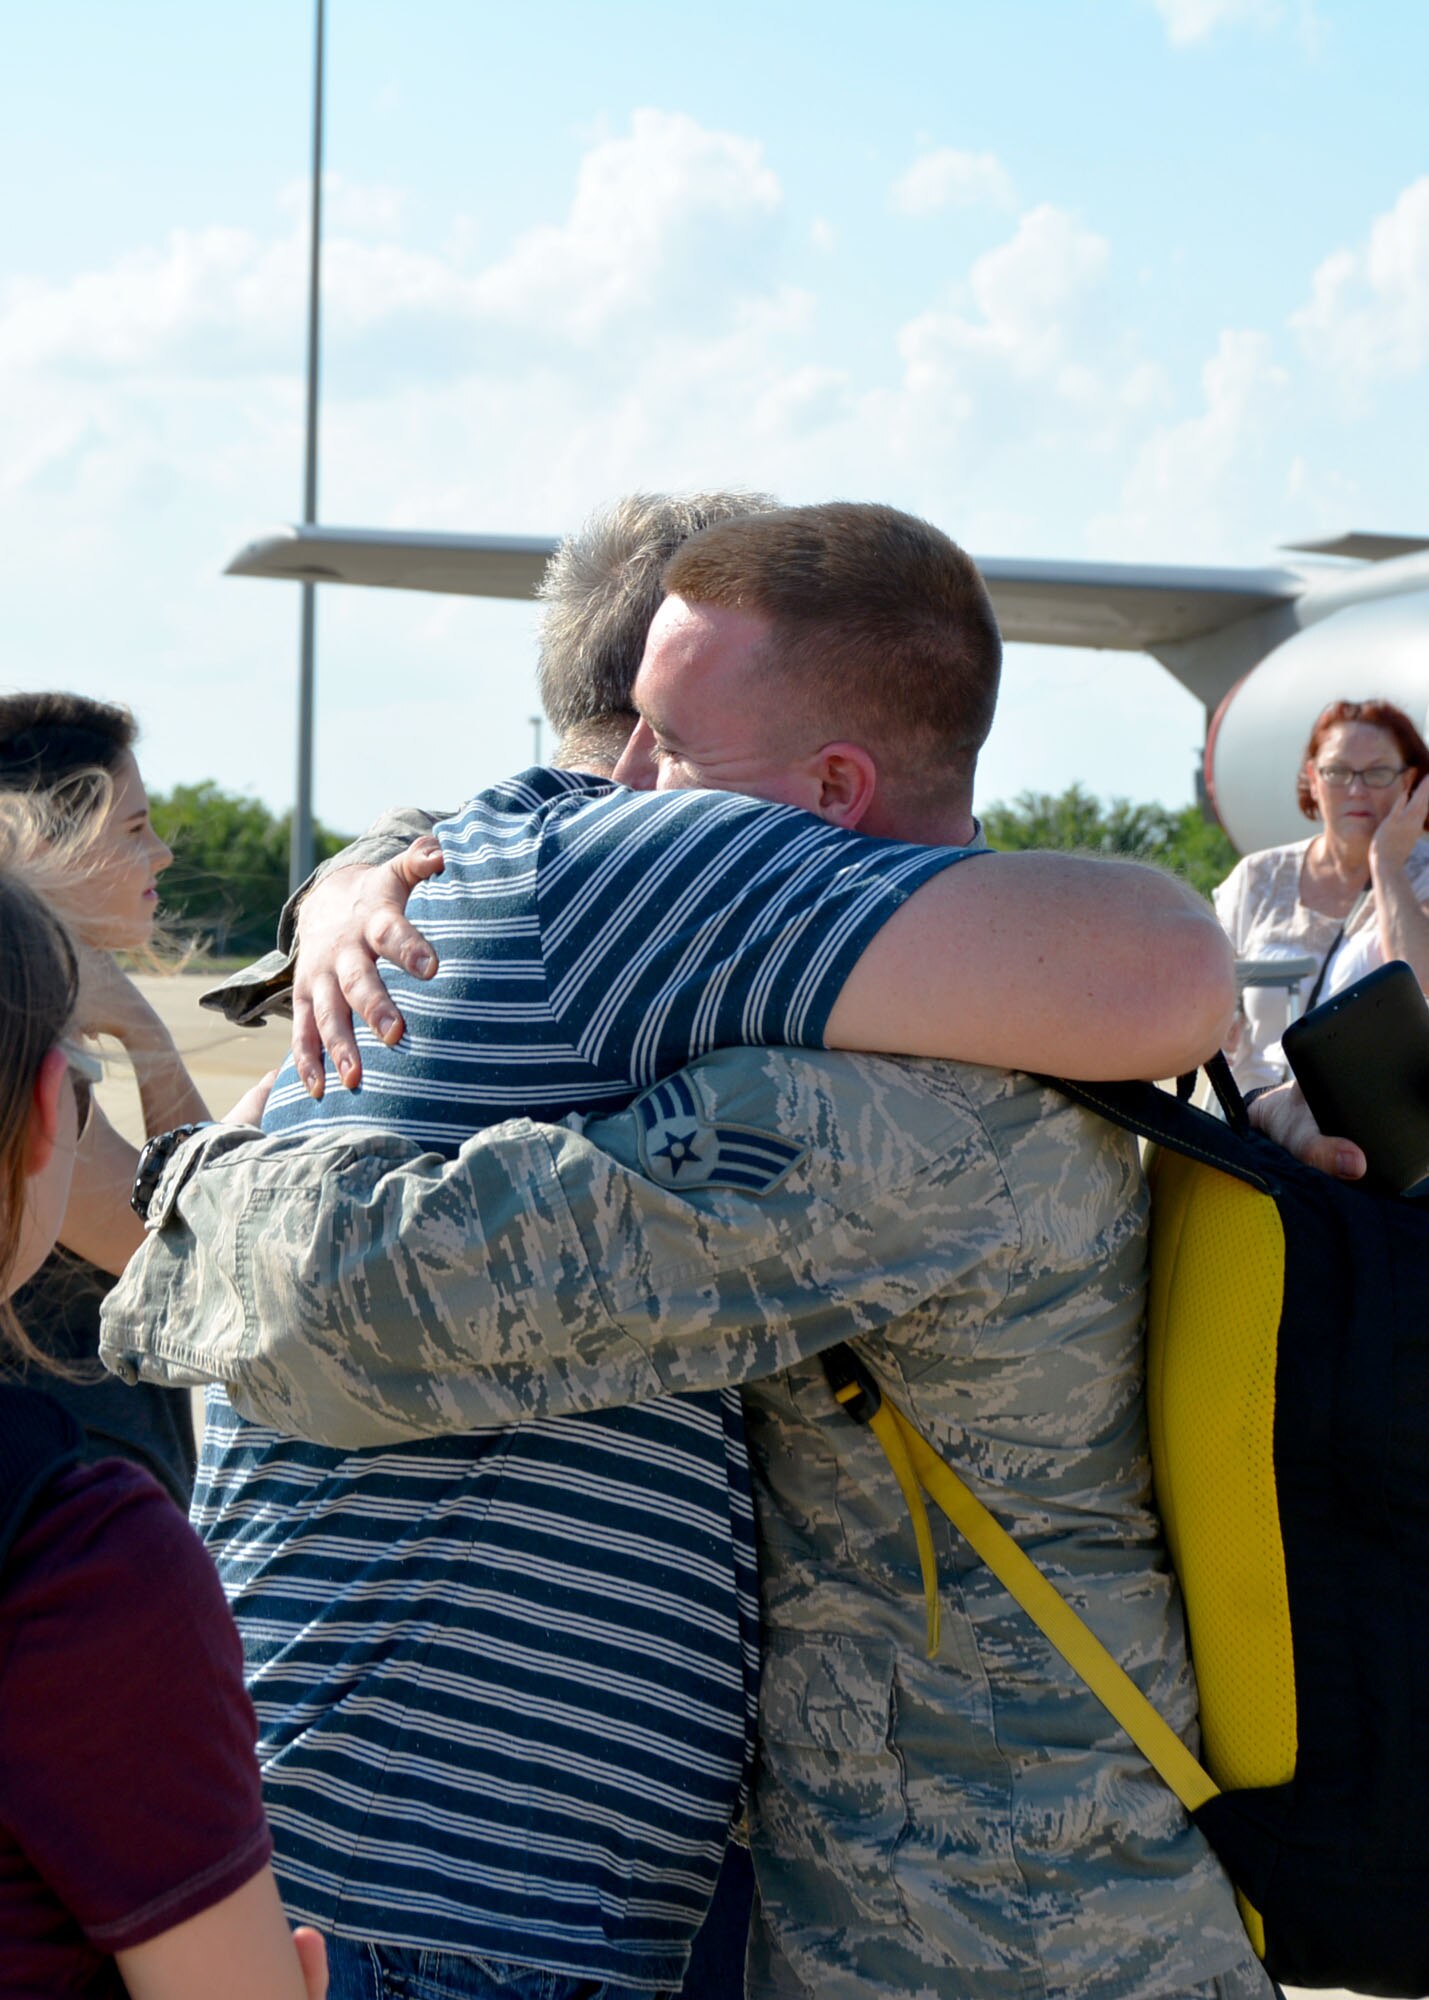 Senior Airman Joshua Hines of the 507th Aircraft Maintenance Squadron at Tinker Air Force Base, Okla., embraces his father June 11, 2016, following a four-month deployment to Southwest Asia. (U.S. Air Force photo/Tech. Sgt. Lauren Gleason)